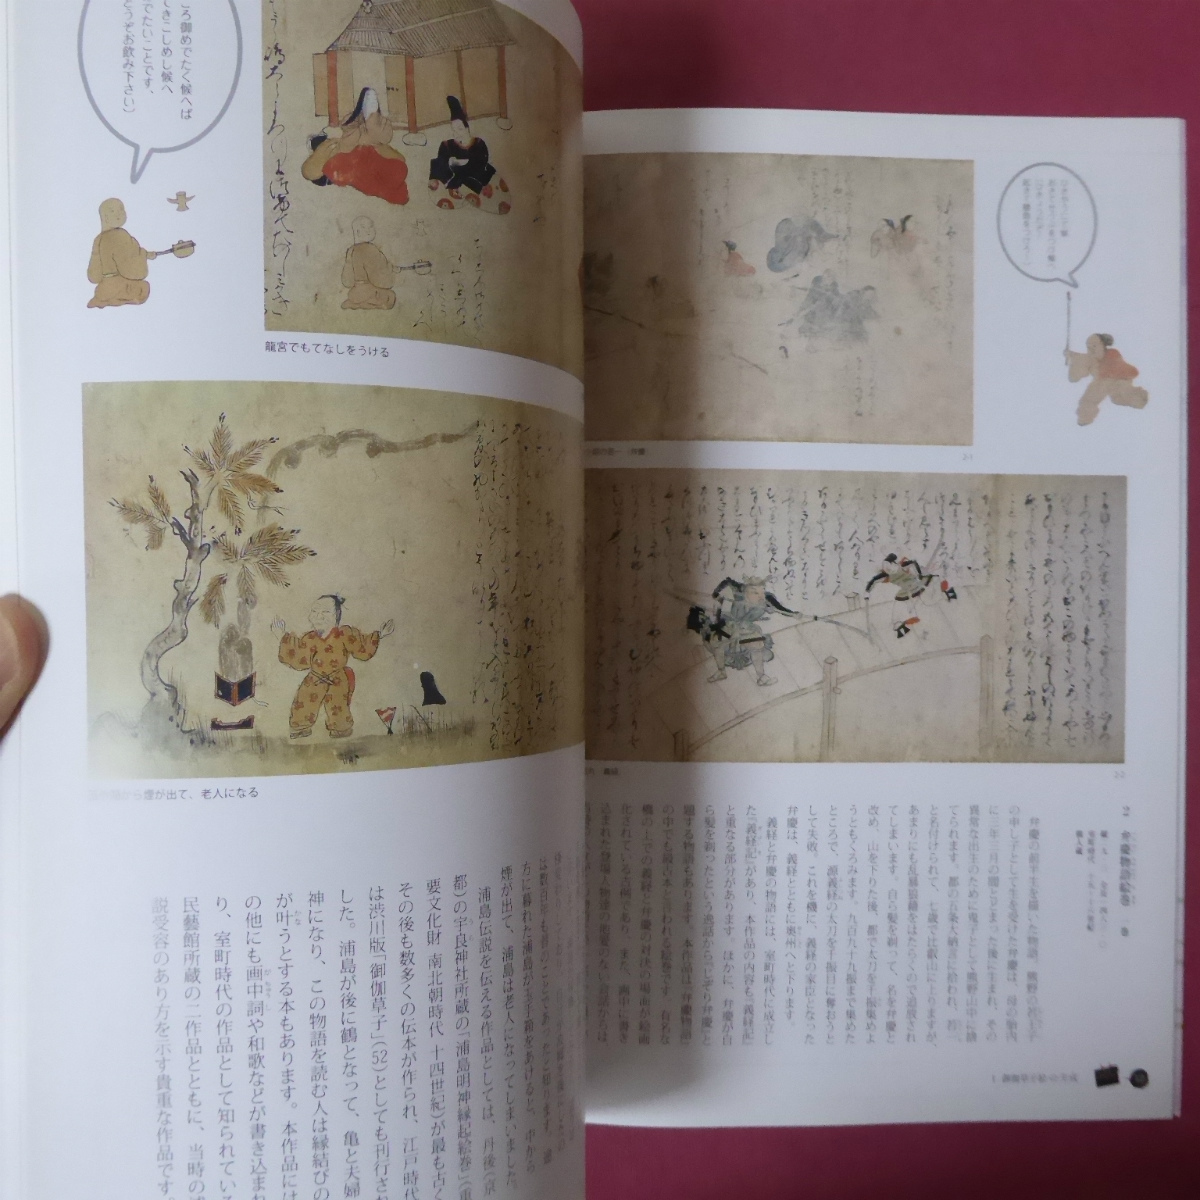 w23 llustrated book [.. comfort Japan ... story -..... picture book. world / Heisei era 18 year * virtue river art gallery ]...:..... picture book. world / version book@ because of spread 